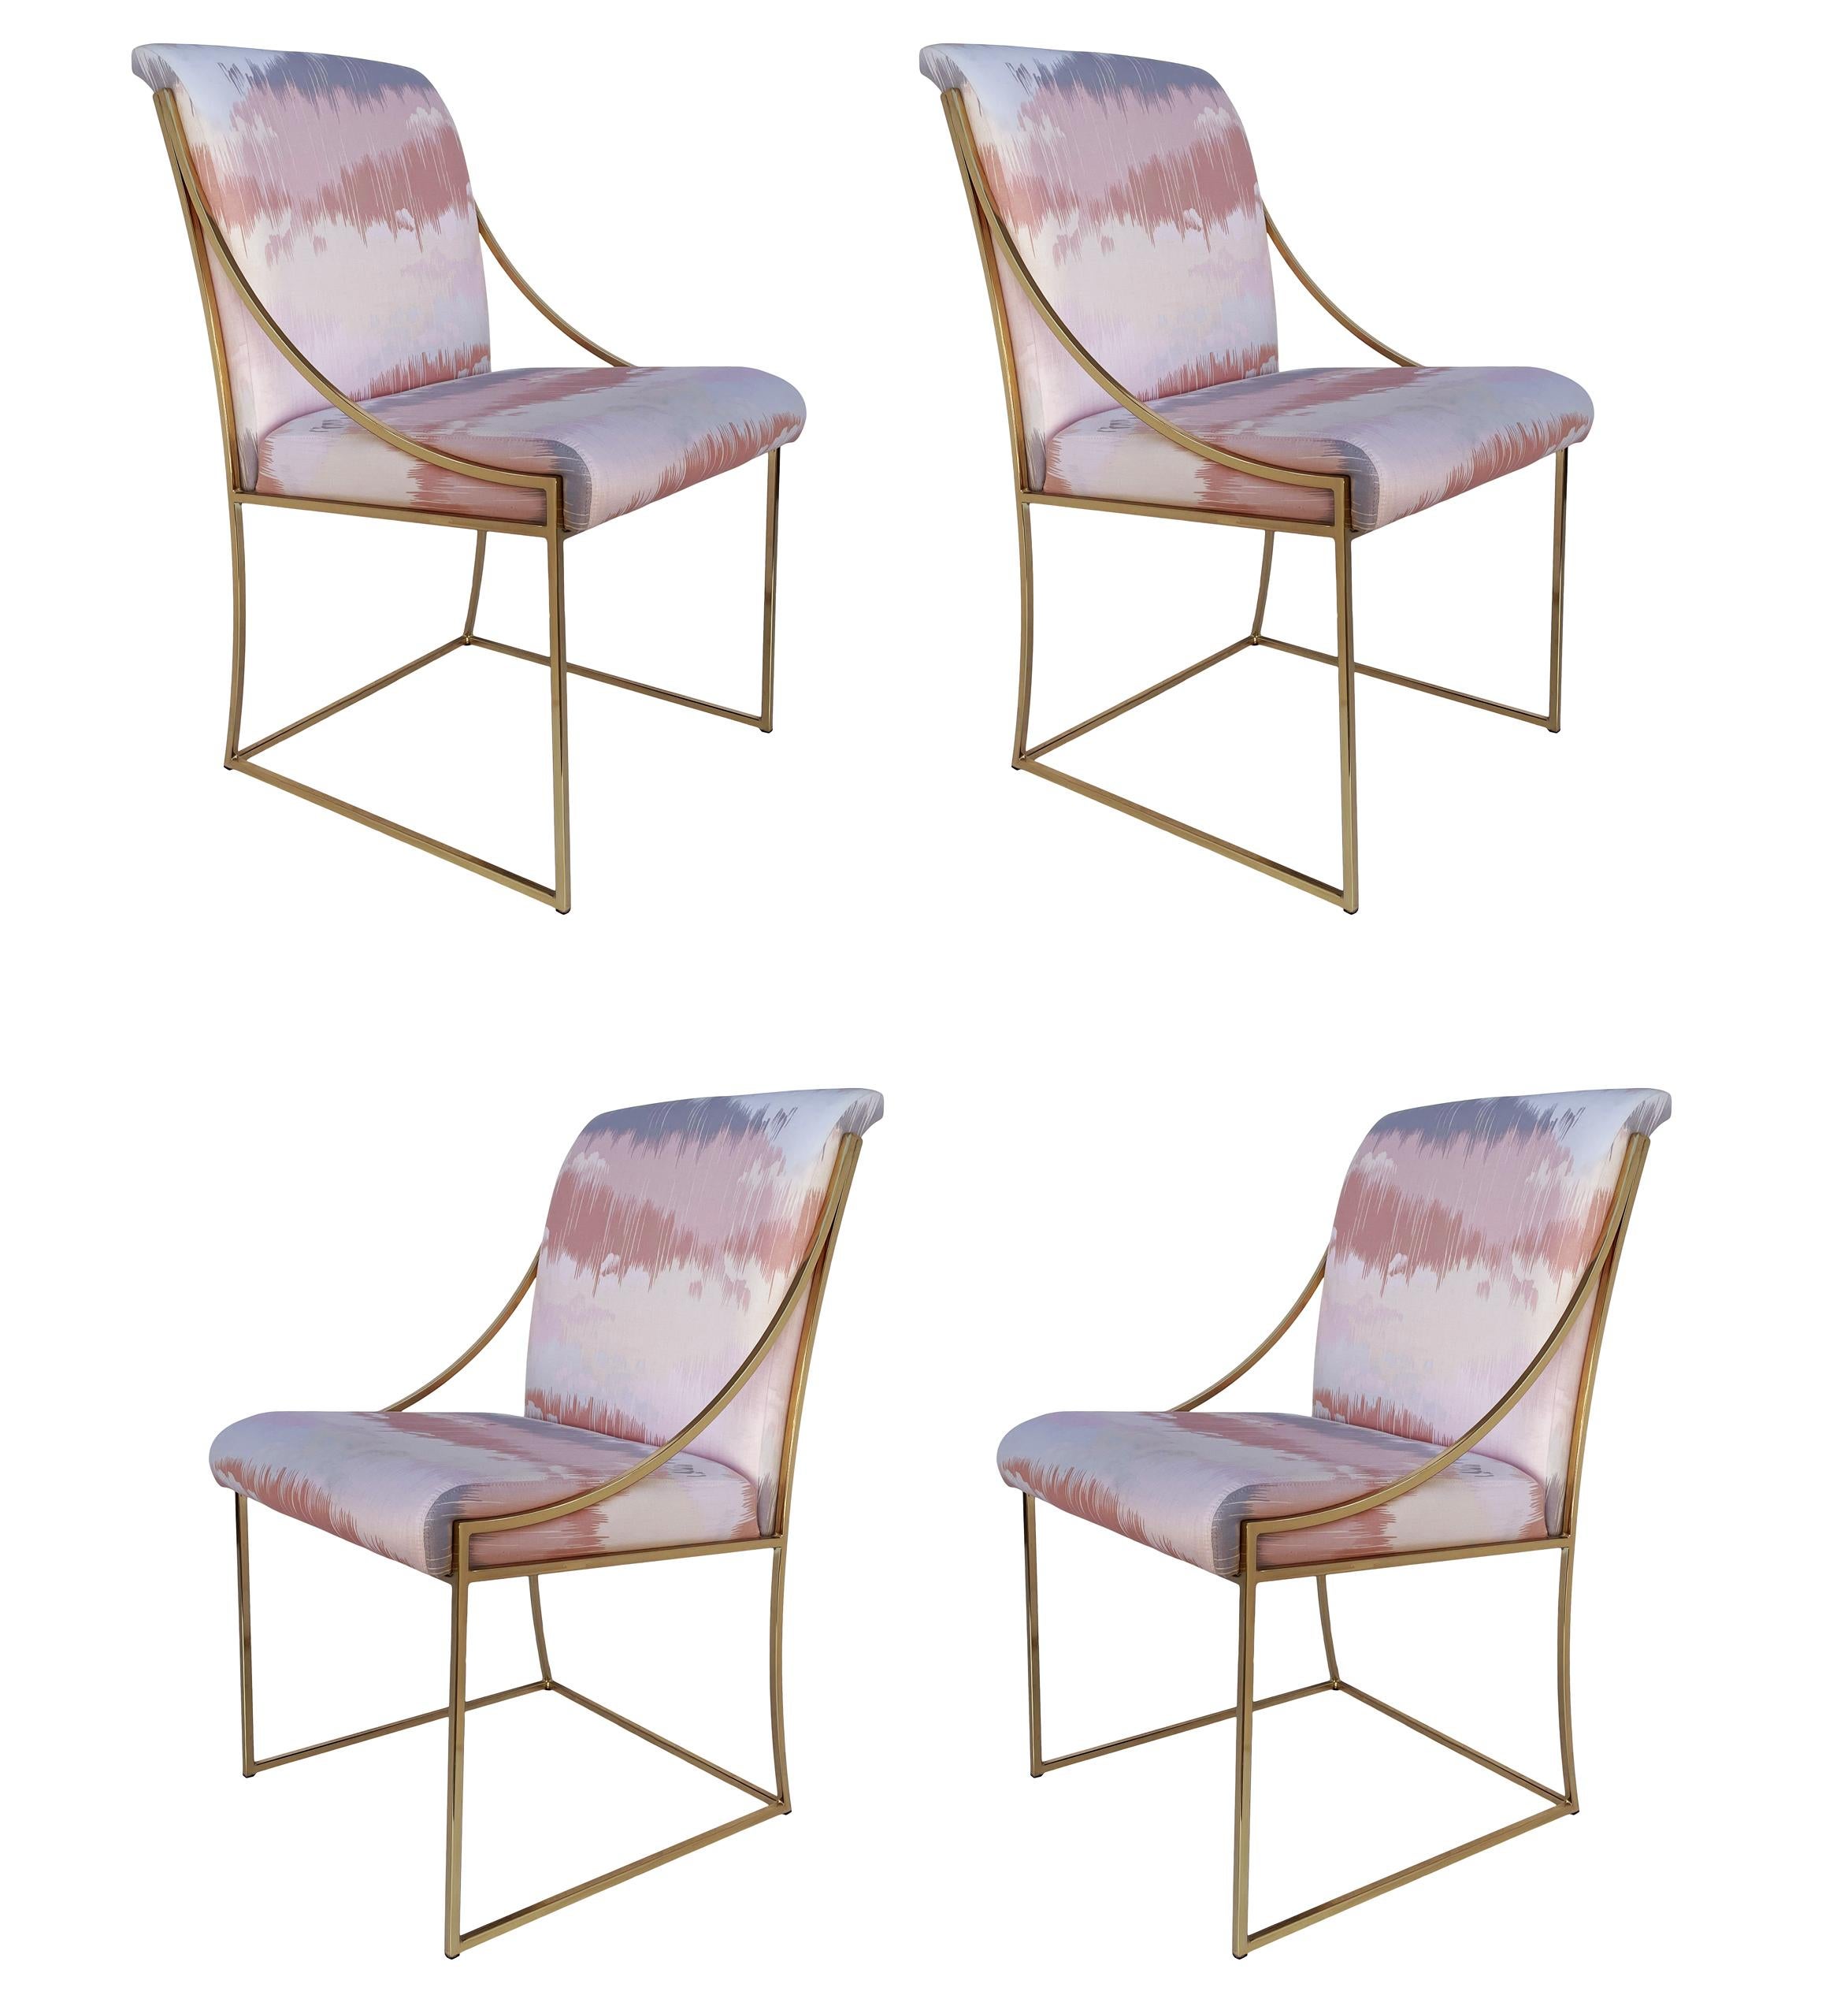 Four Mid Century Italian Post Modern Brass Frame Dining Chairs after Mastercraft In Good Condition For Sale In Philadelphia, PA